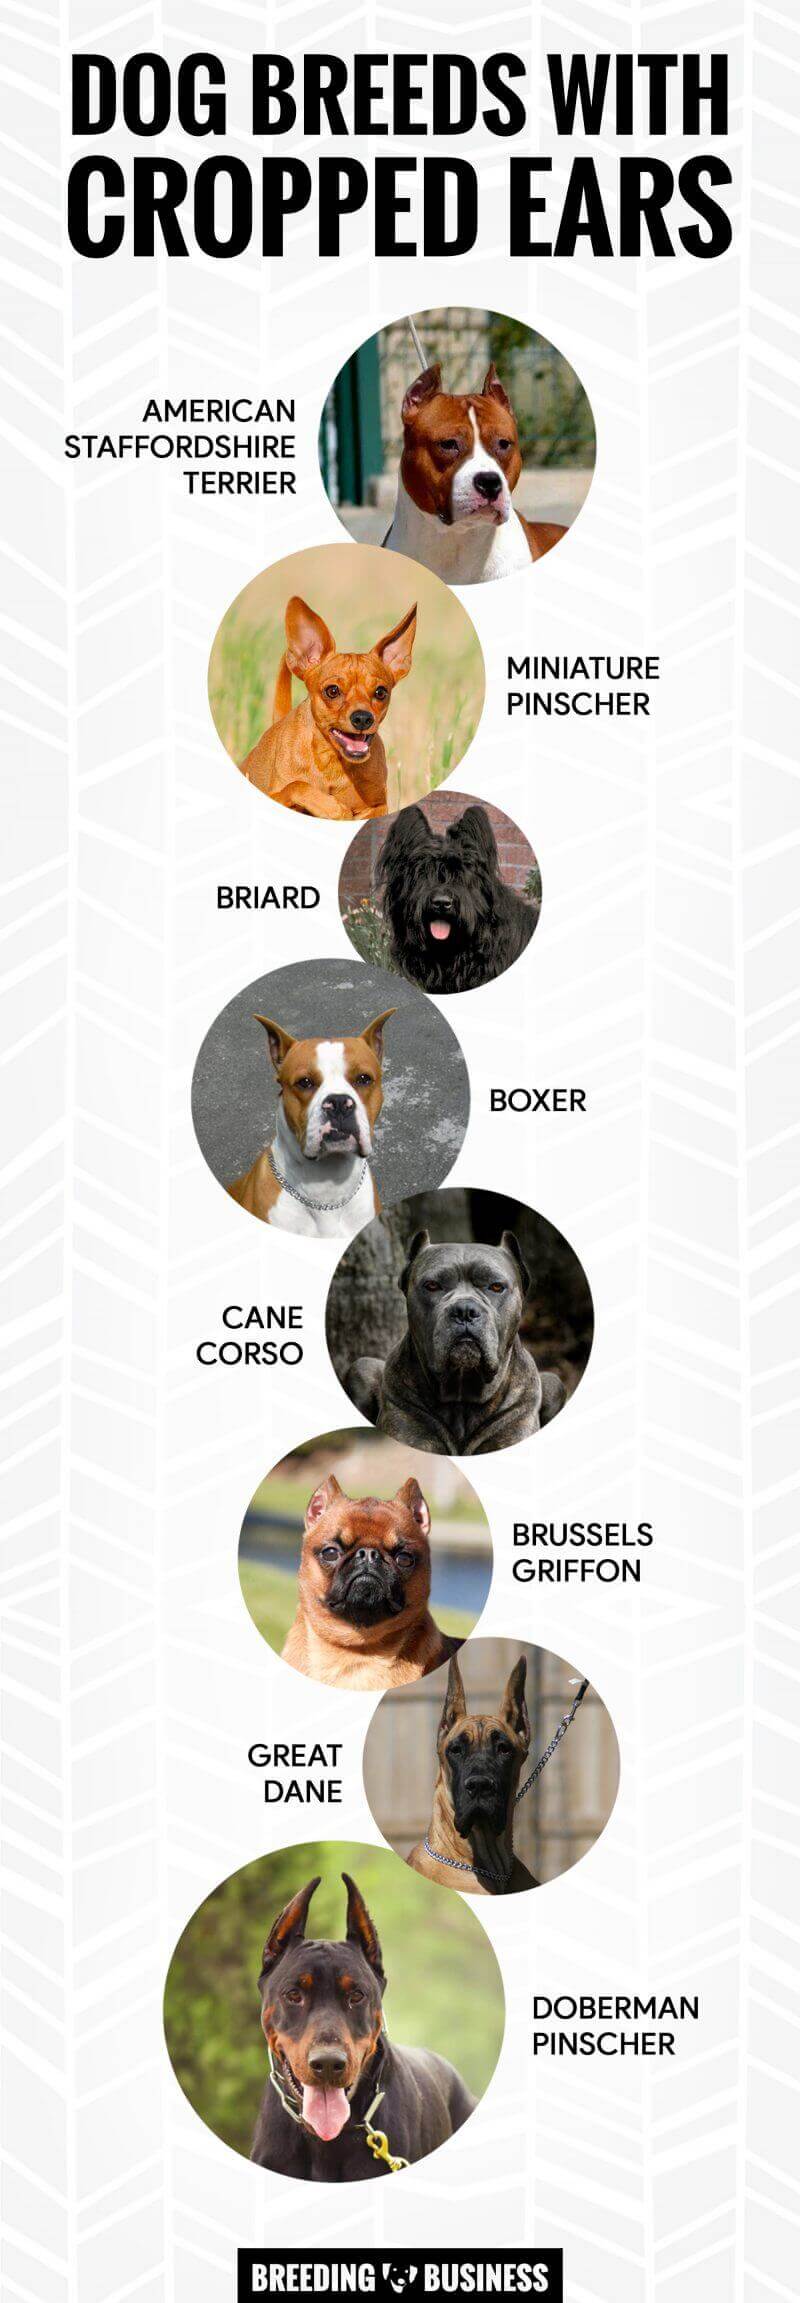 cane corso ear cropping vets